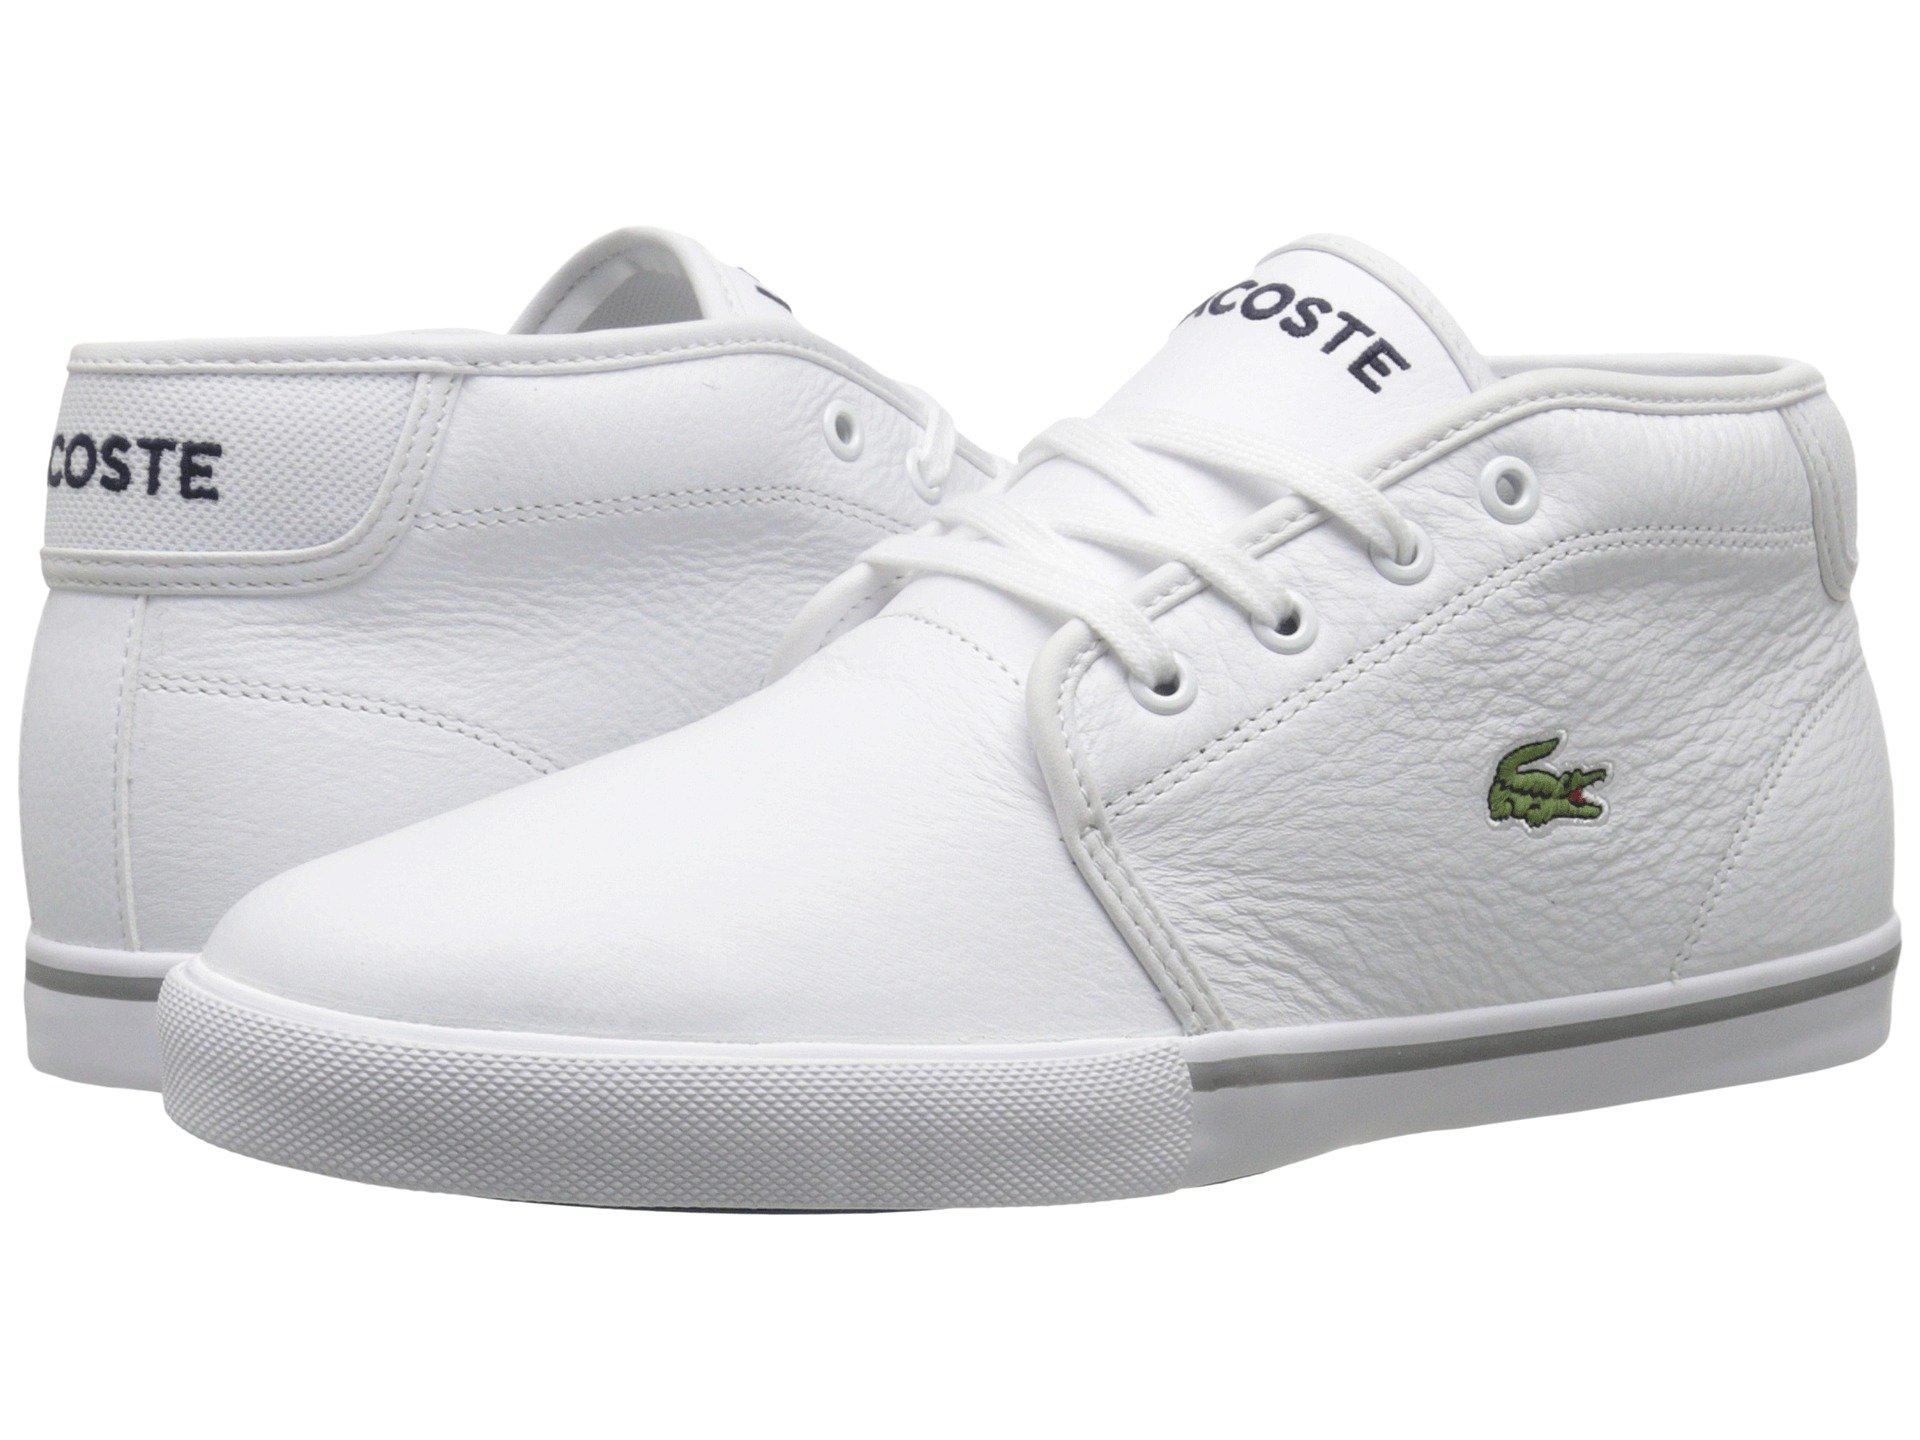 lacoste ampthill white leather